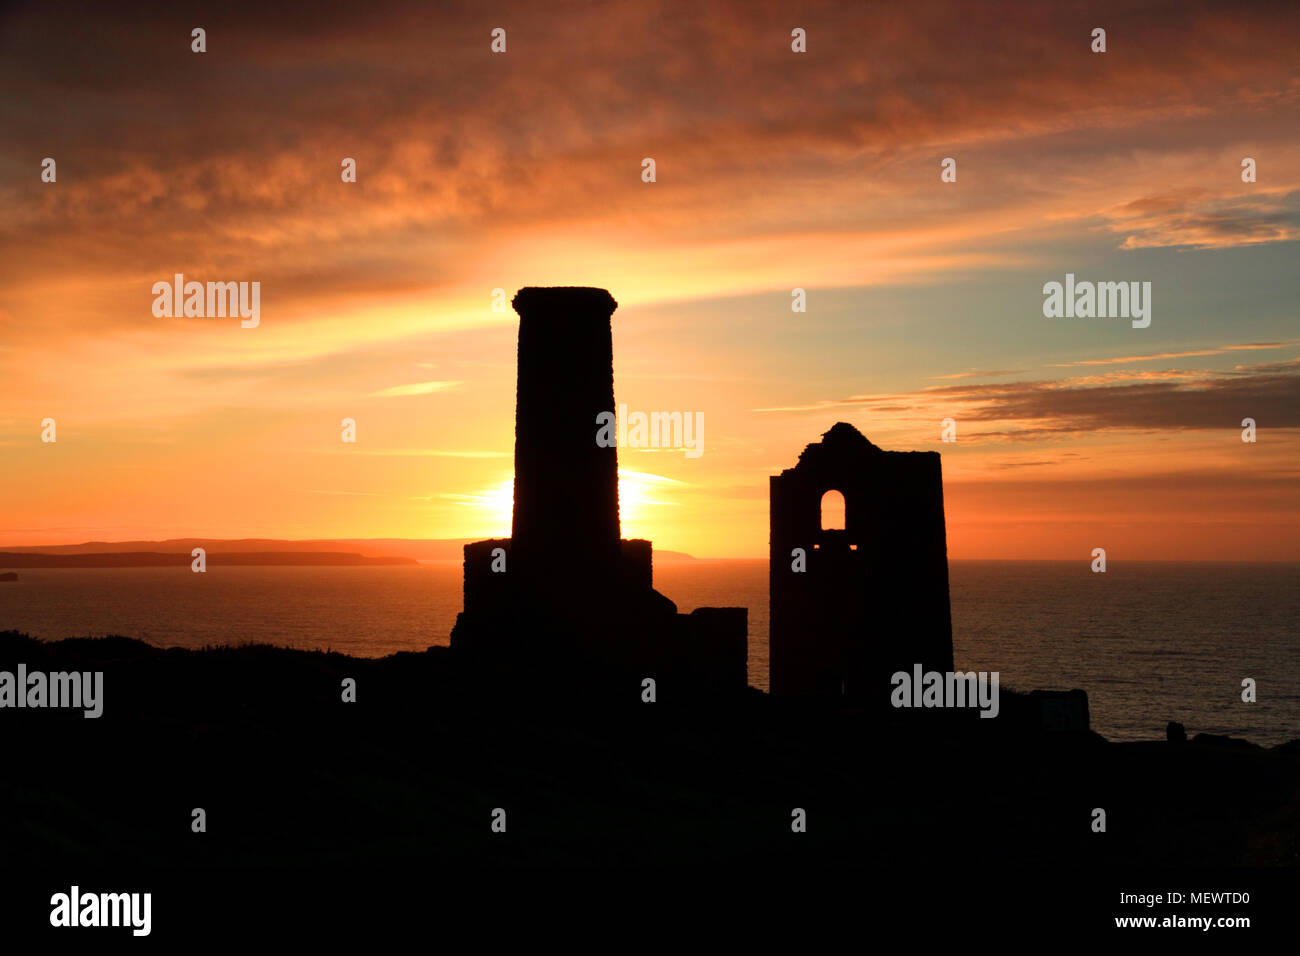 The ruins of the Towanroath engine house, St Agnes, are silhouetted by the setting sun. Stock Photo